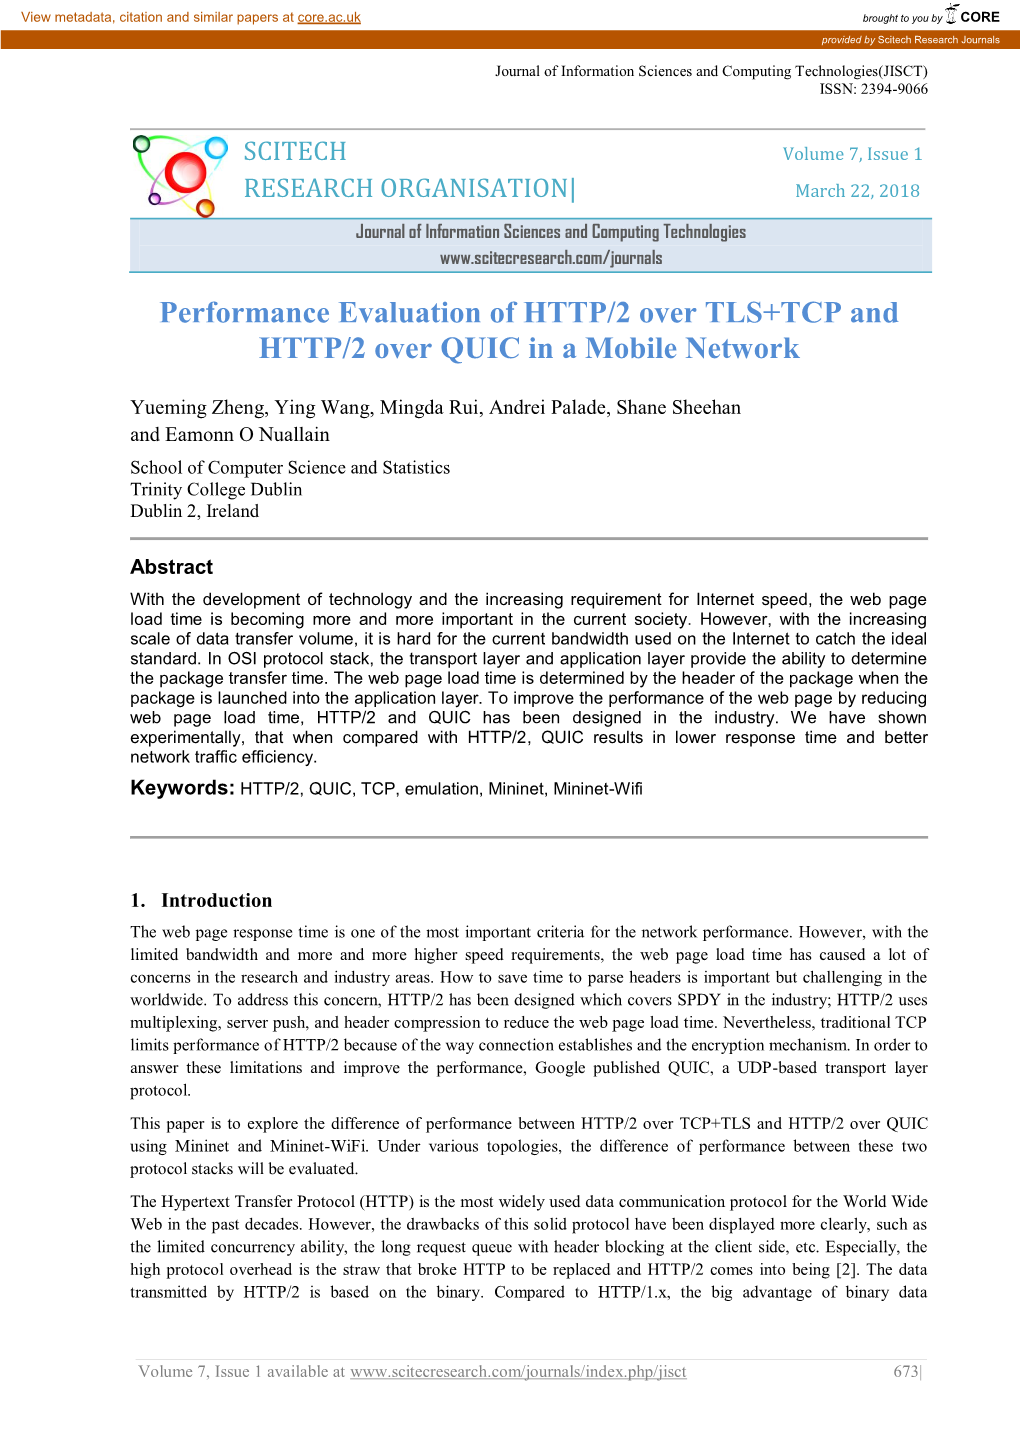 Performance Evaluation of HTTP/2 Over TLS+TCP and HTTP/2 Over QUIC in a Mobile Network